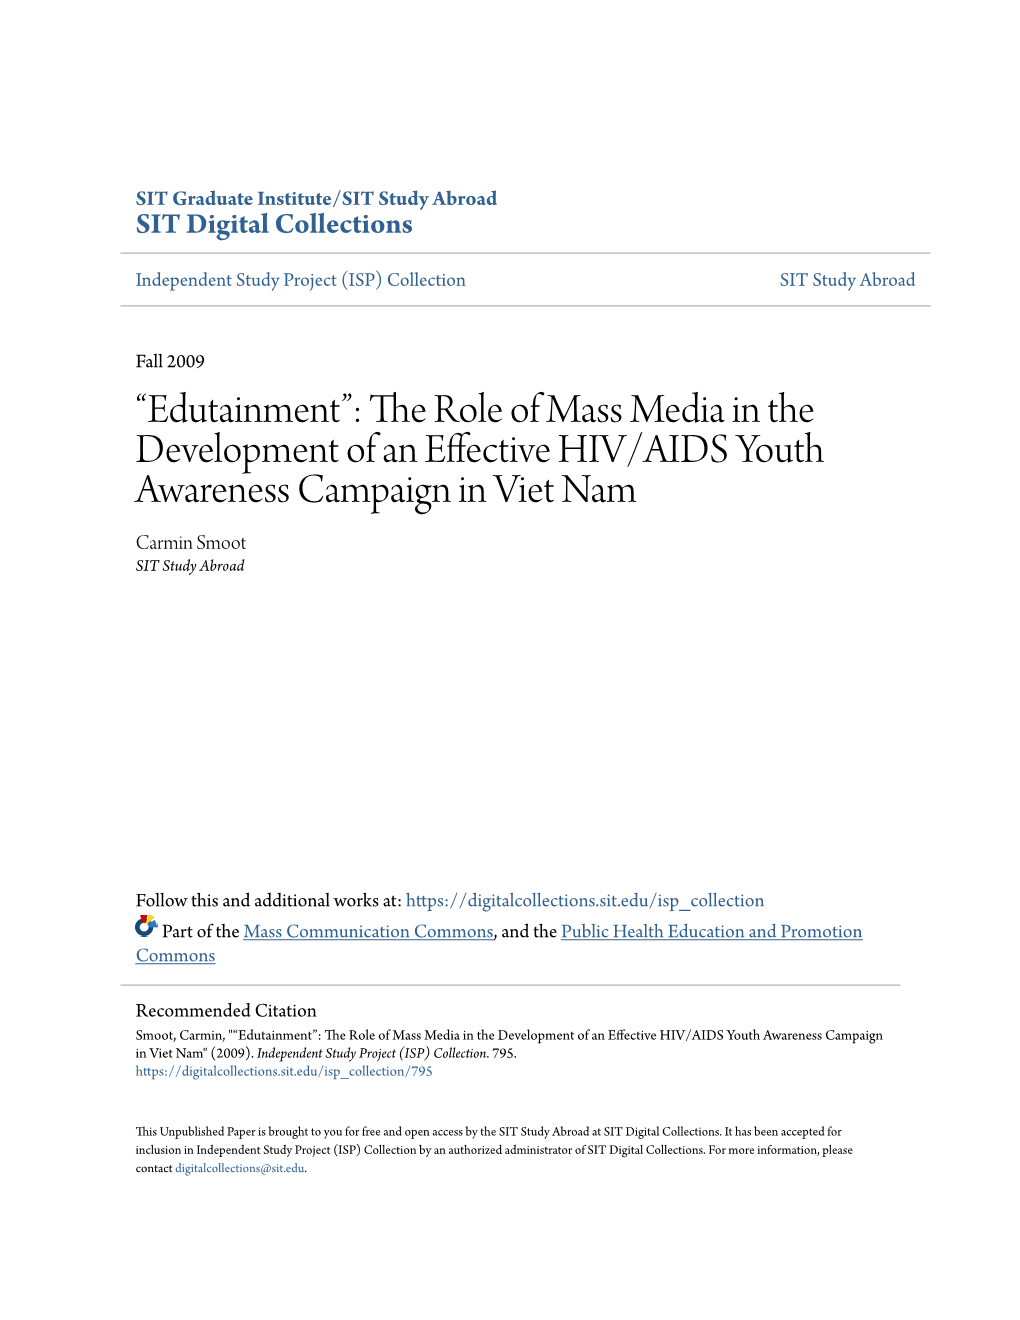 The Role of Mass Media in the Development of an Effective HIV/AIDS Youth Awareness Campaign in Viet Nam Carmin Smoot SIT Study Abroad